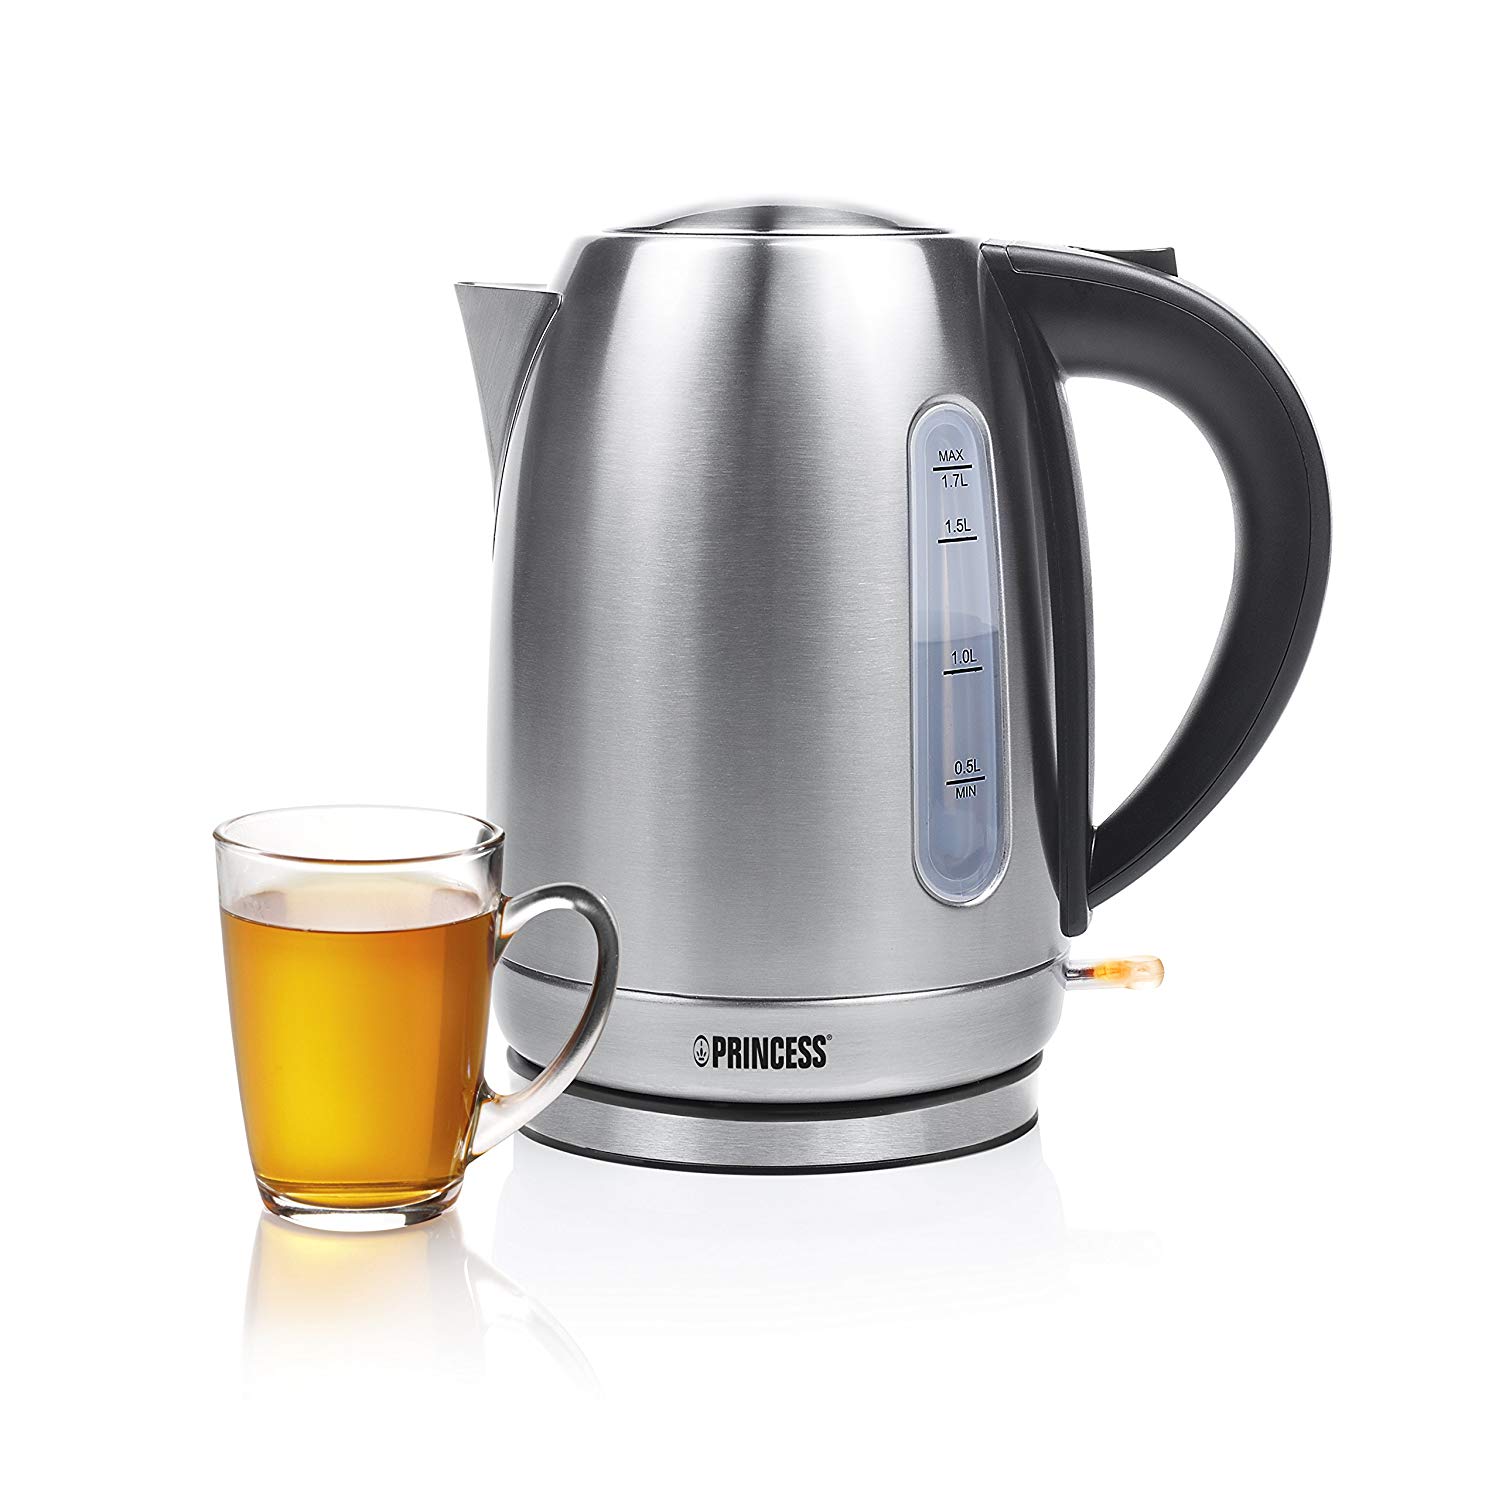 Princess 01.236018.01.001 Rust-Proof Stainless Steel Kettle, 1.7 Litre, 220